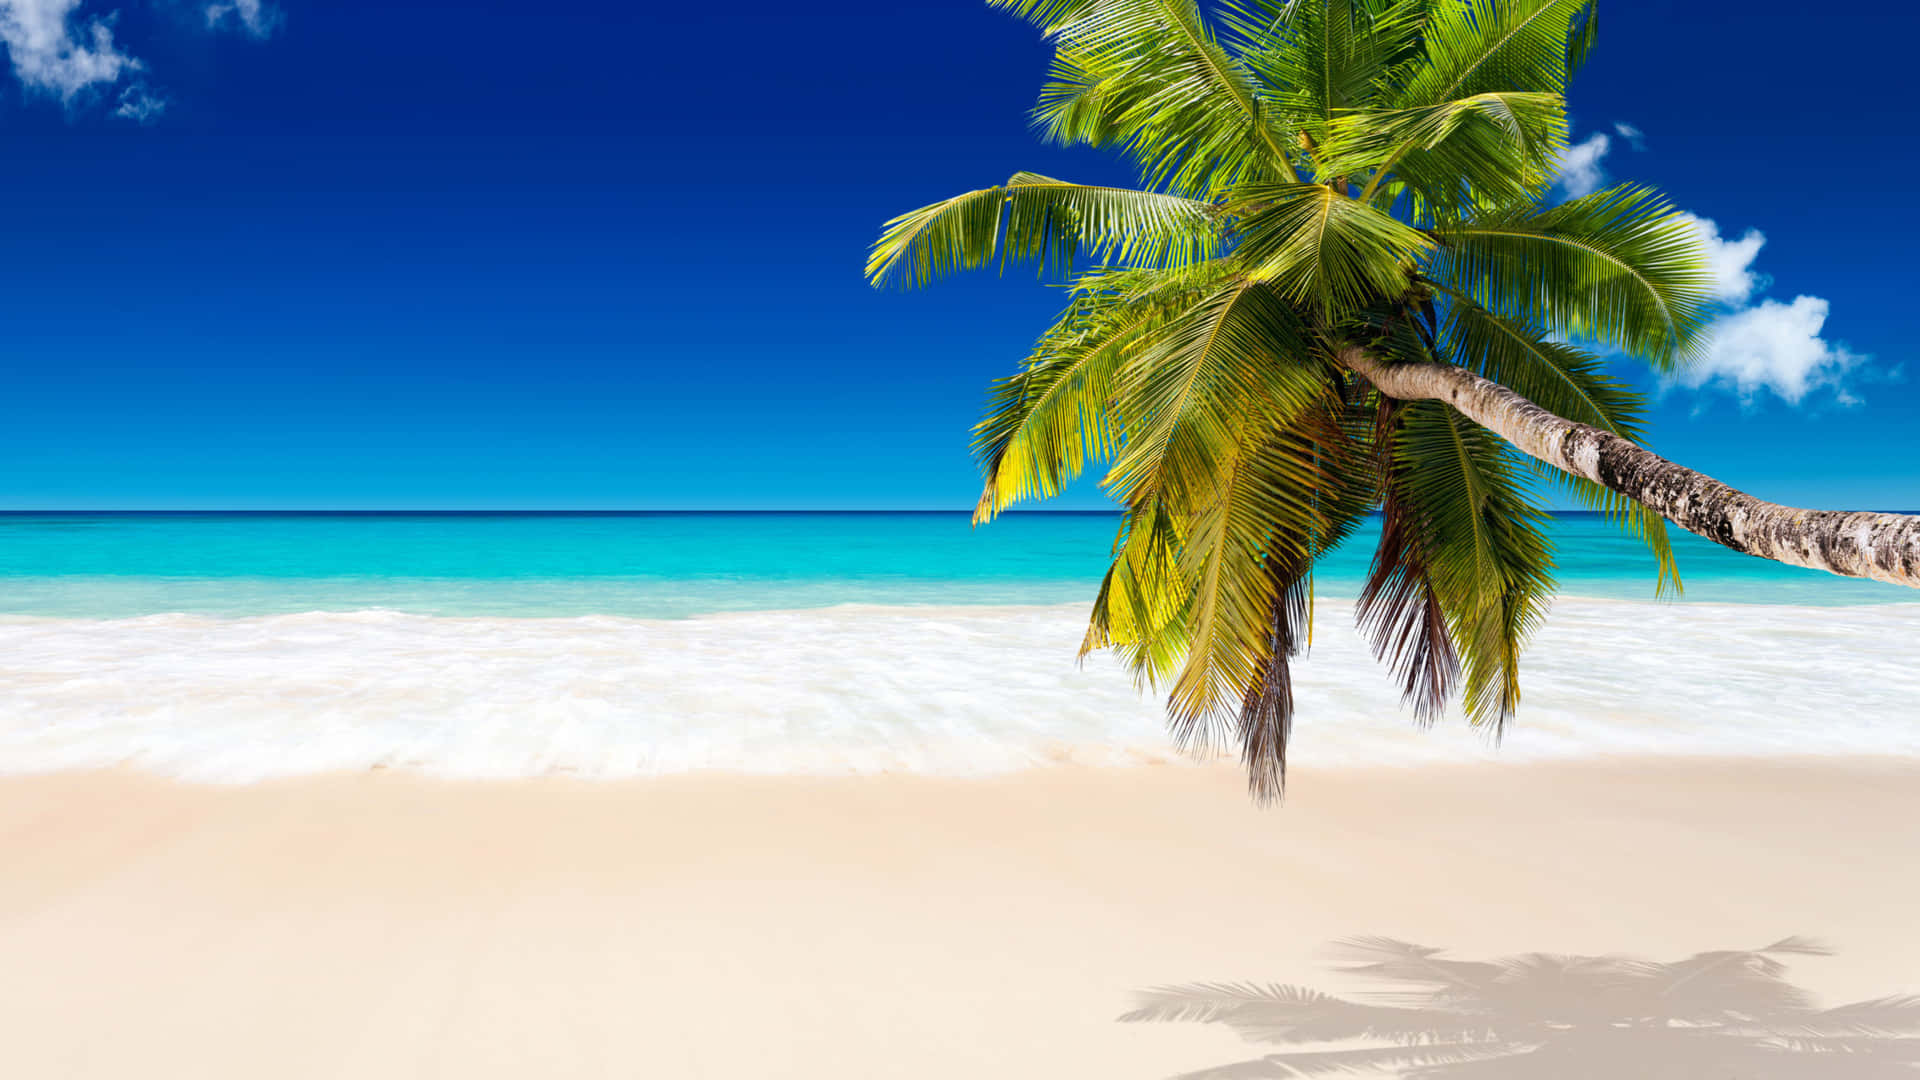 Serene Beach with Towering Palm Trees Wallpaper